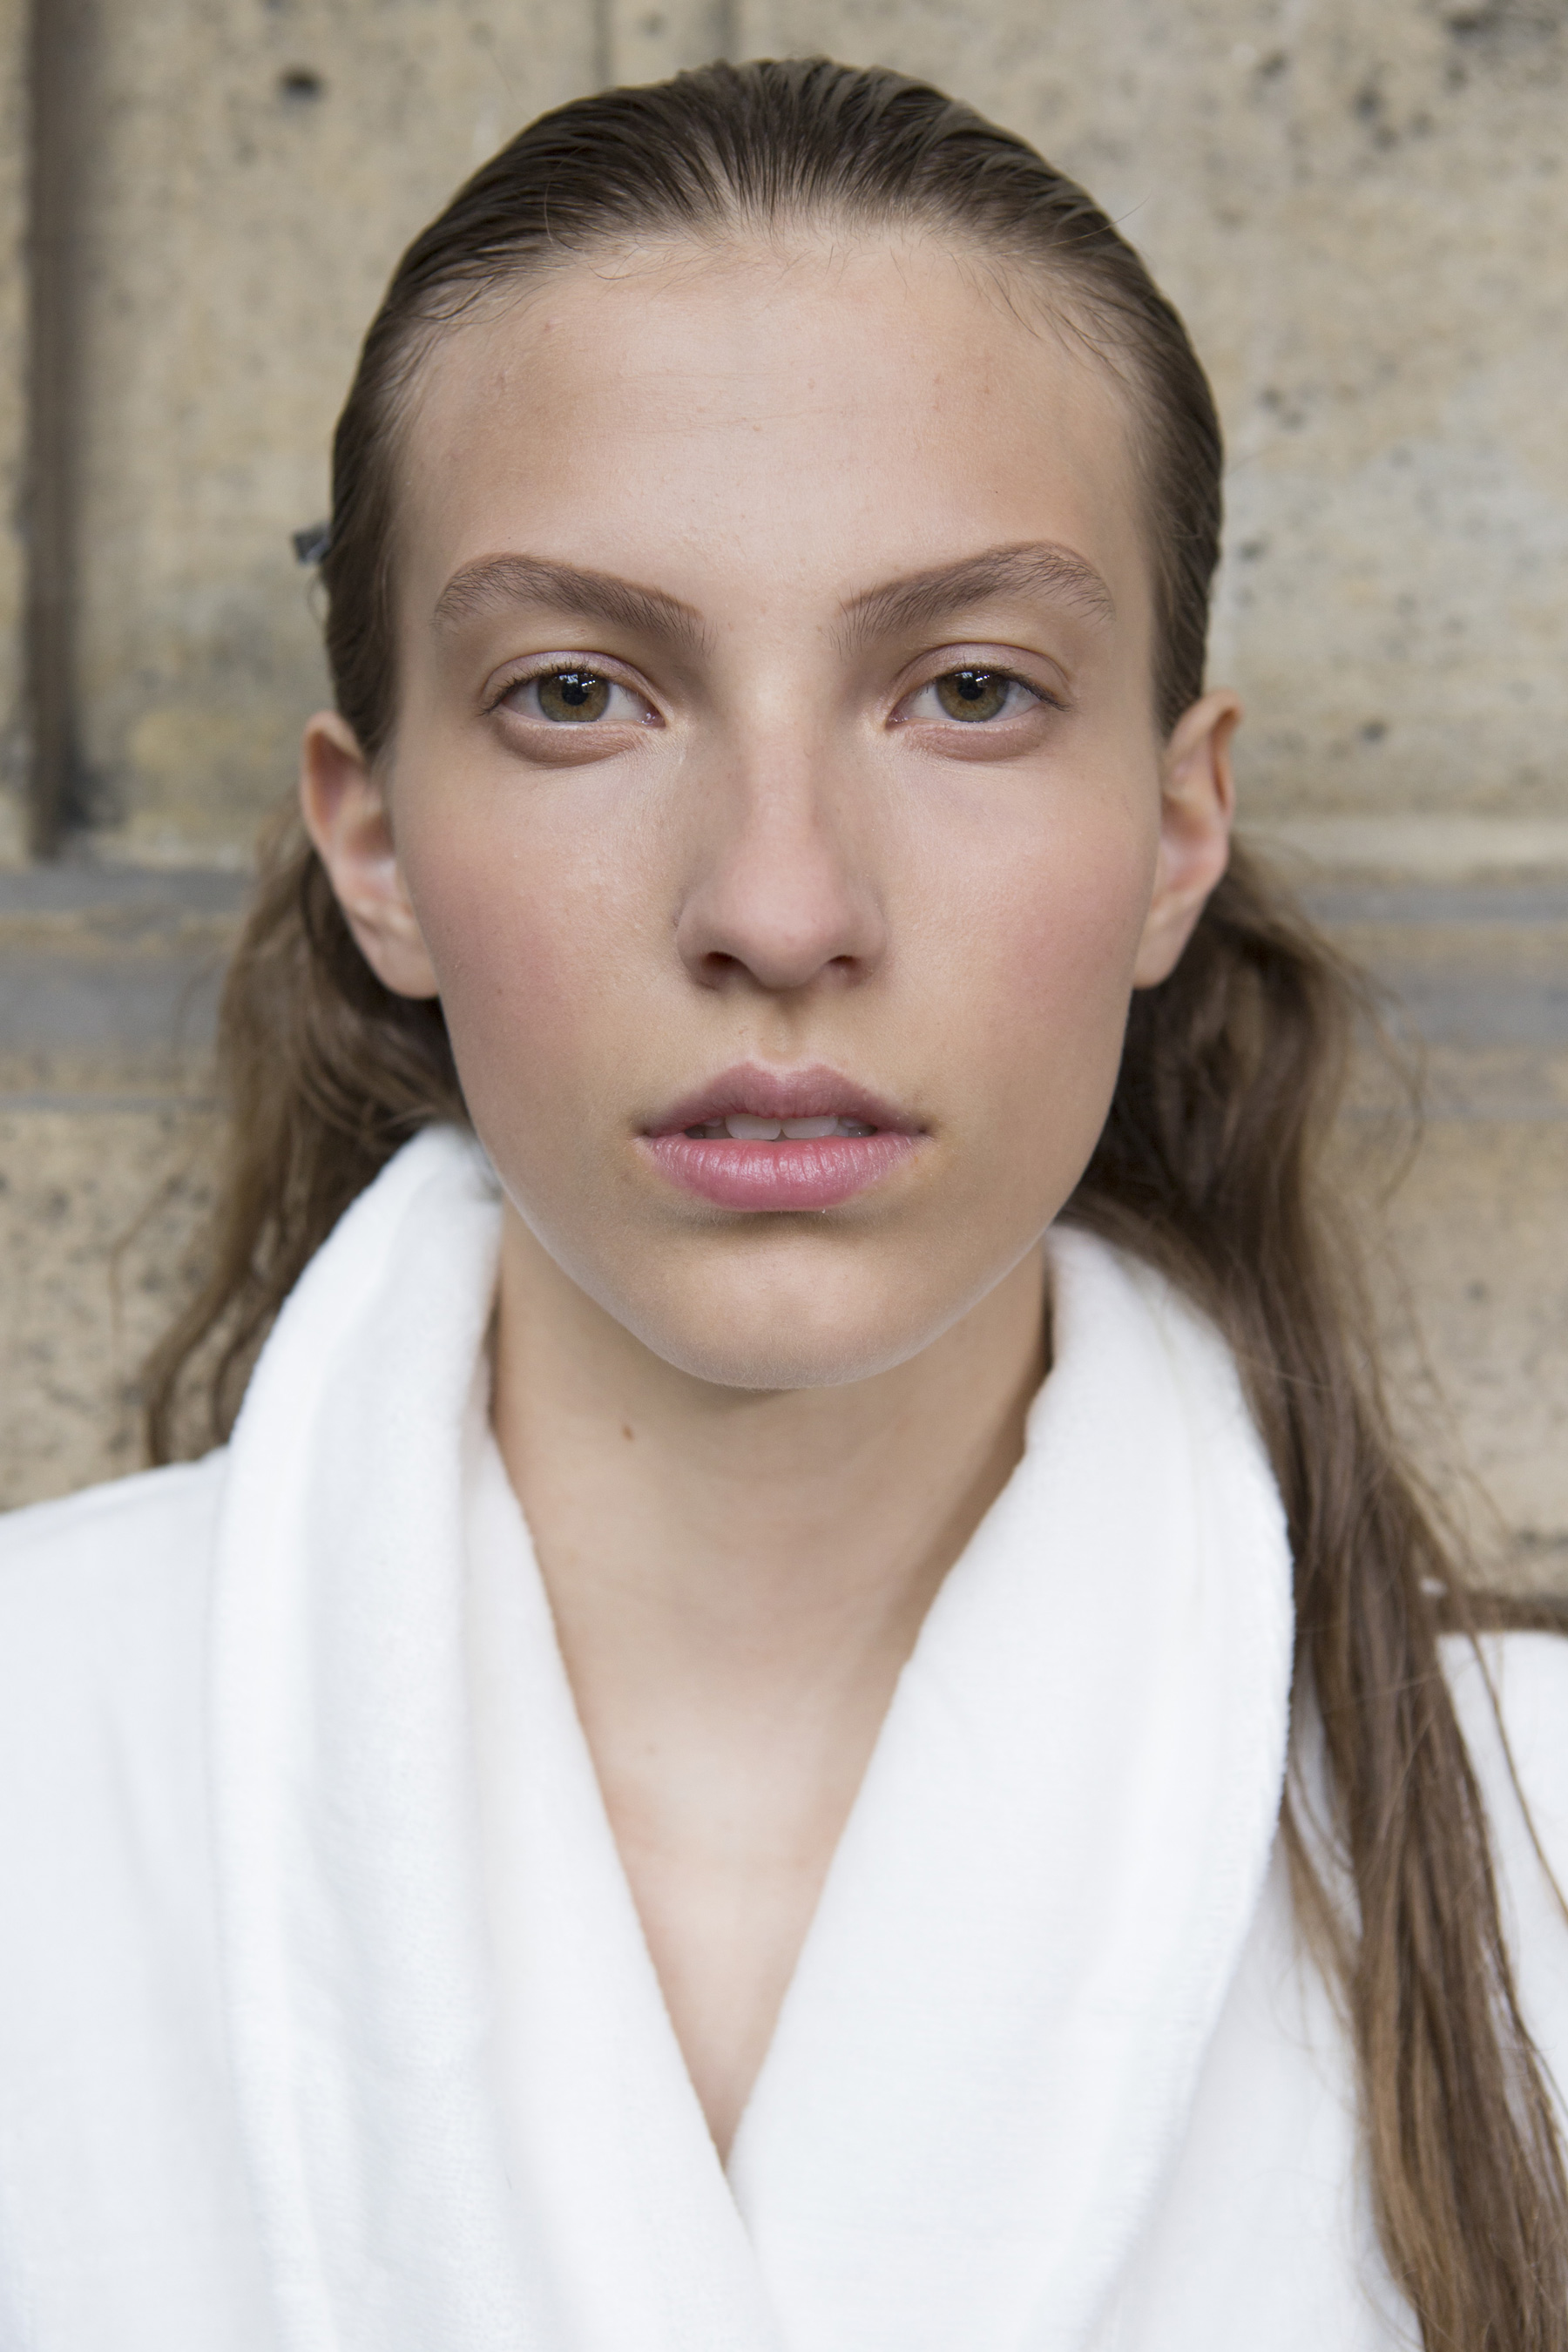 Proenza Schouler Spring 2018 Fashion Show Backstage Beauty - The Impression